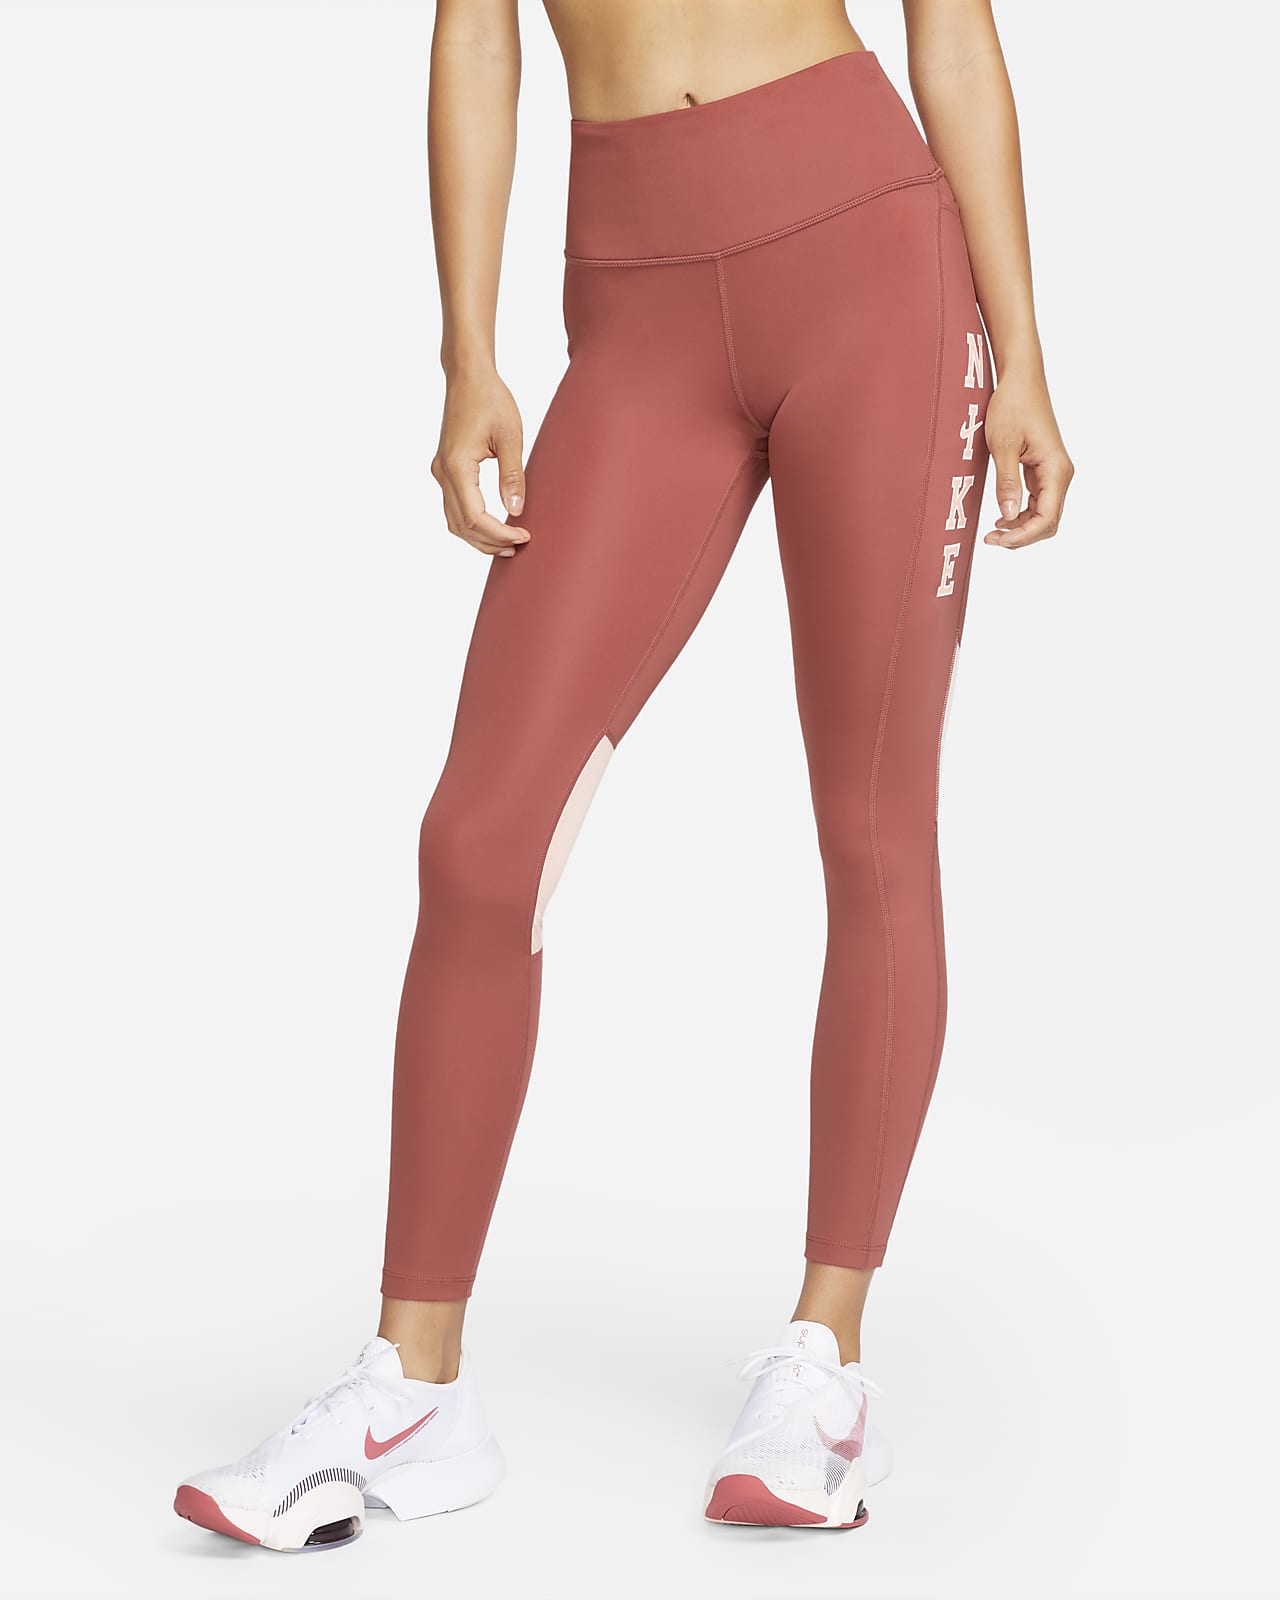 Nike Epic Fast Women's Mid-Rise 7/8 Leggings with Pockets